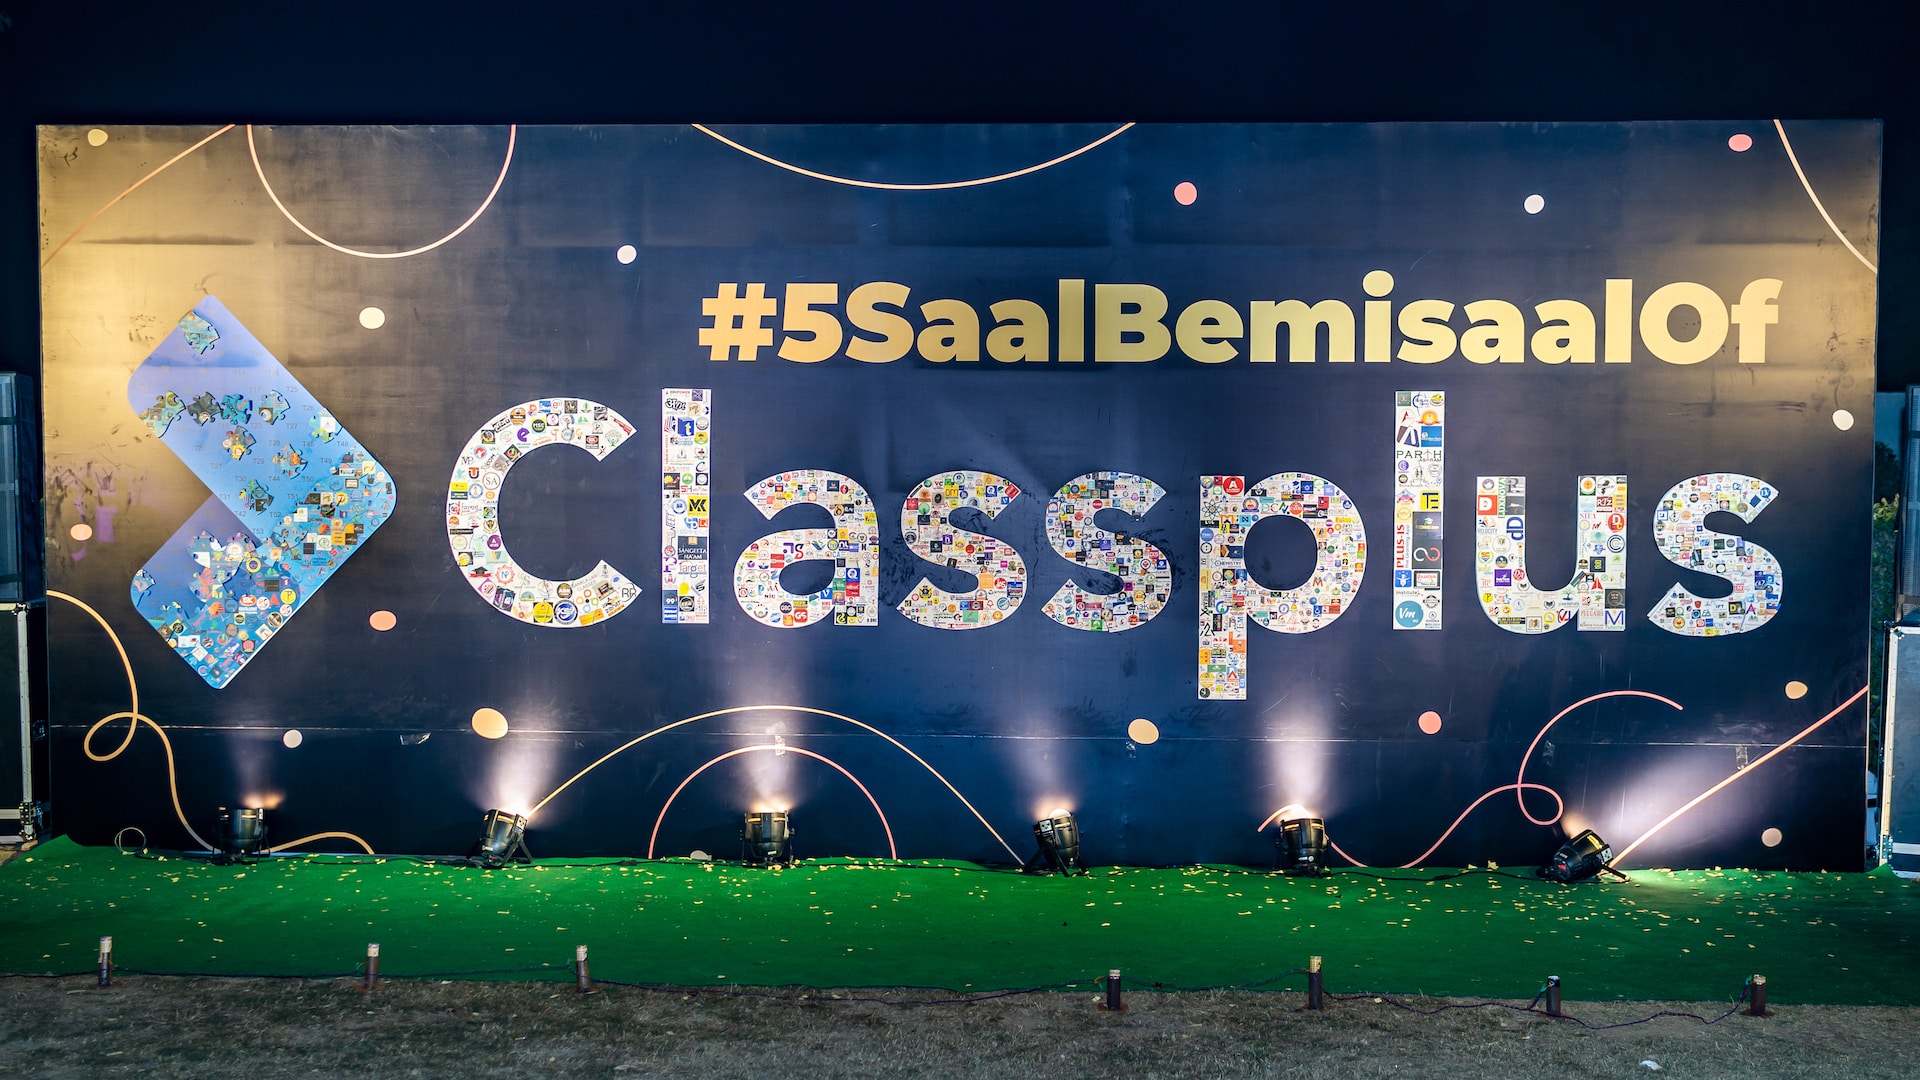 Classplus Celebrates its Founding Day with a First of its Kind ‘Giant’ Tribute to Educators